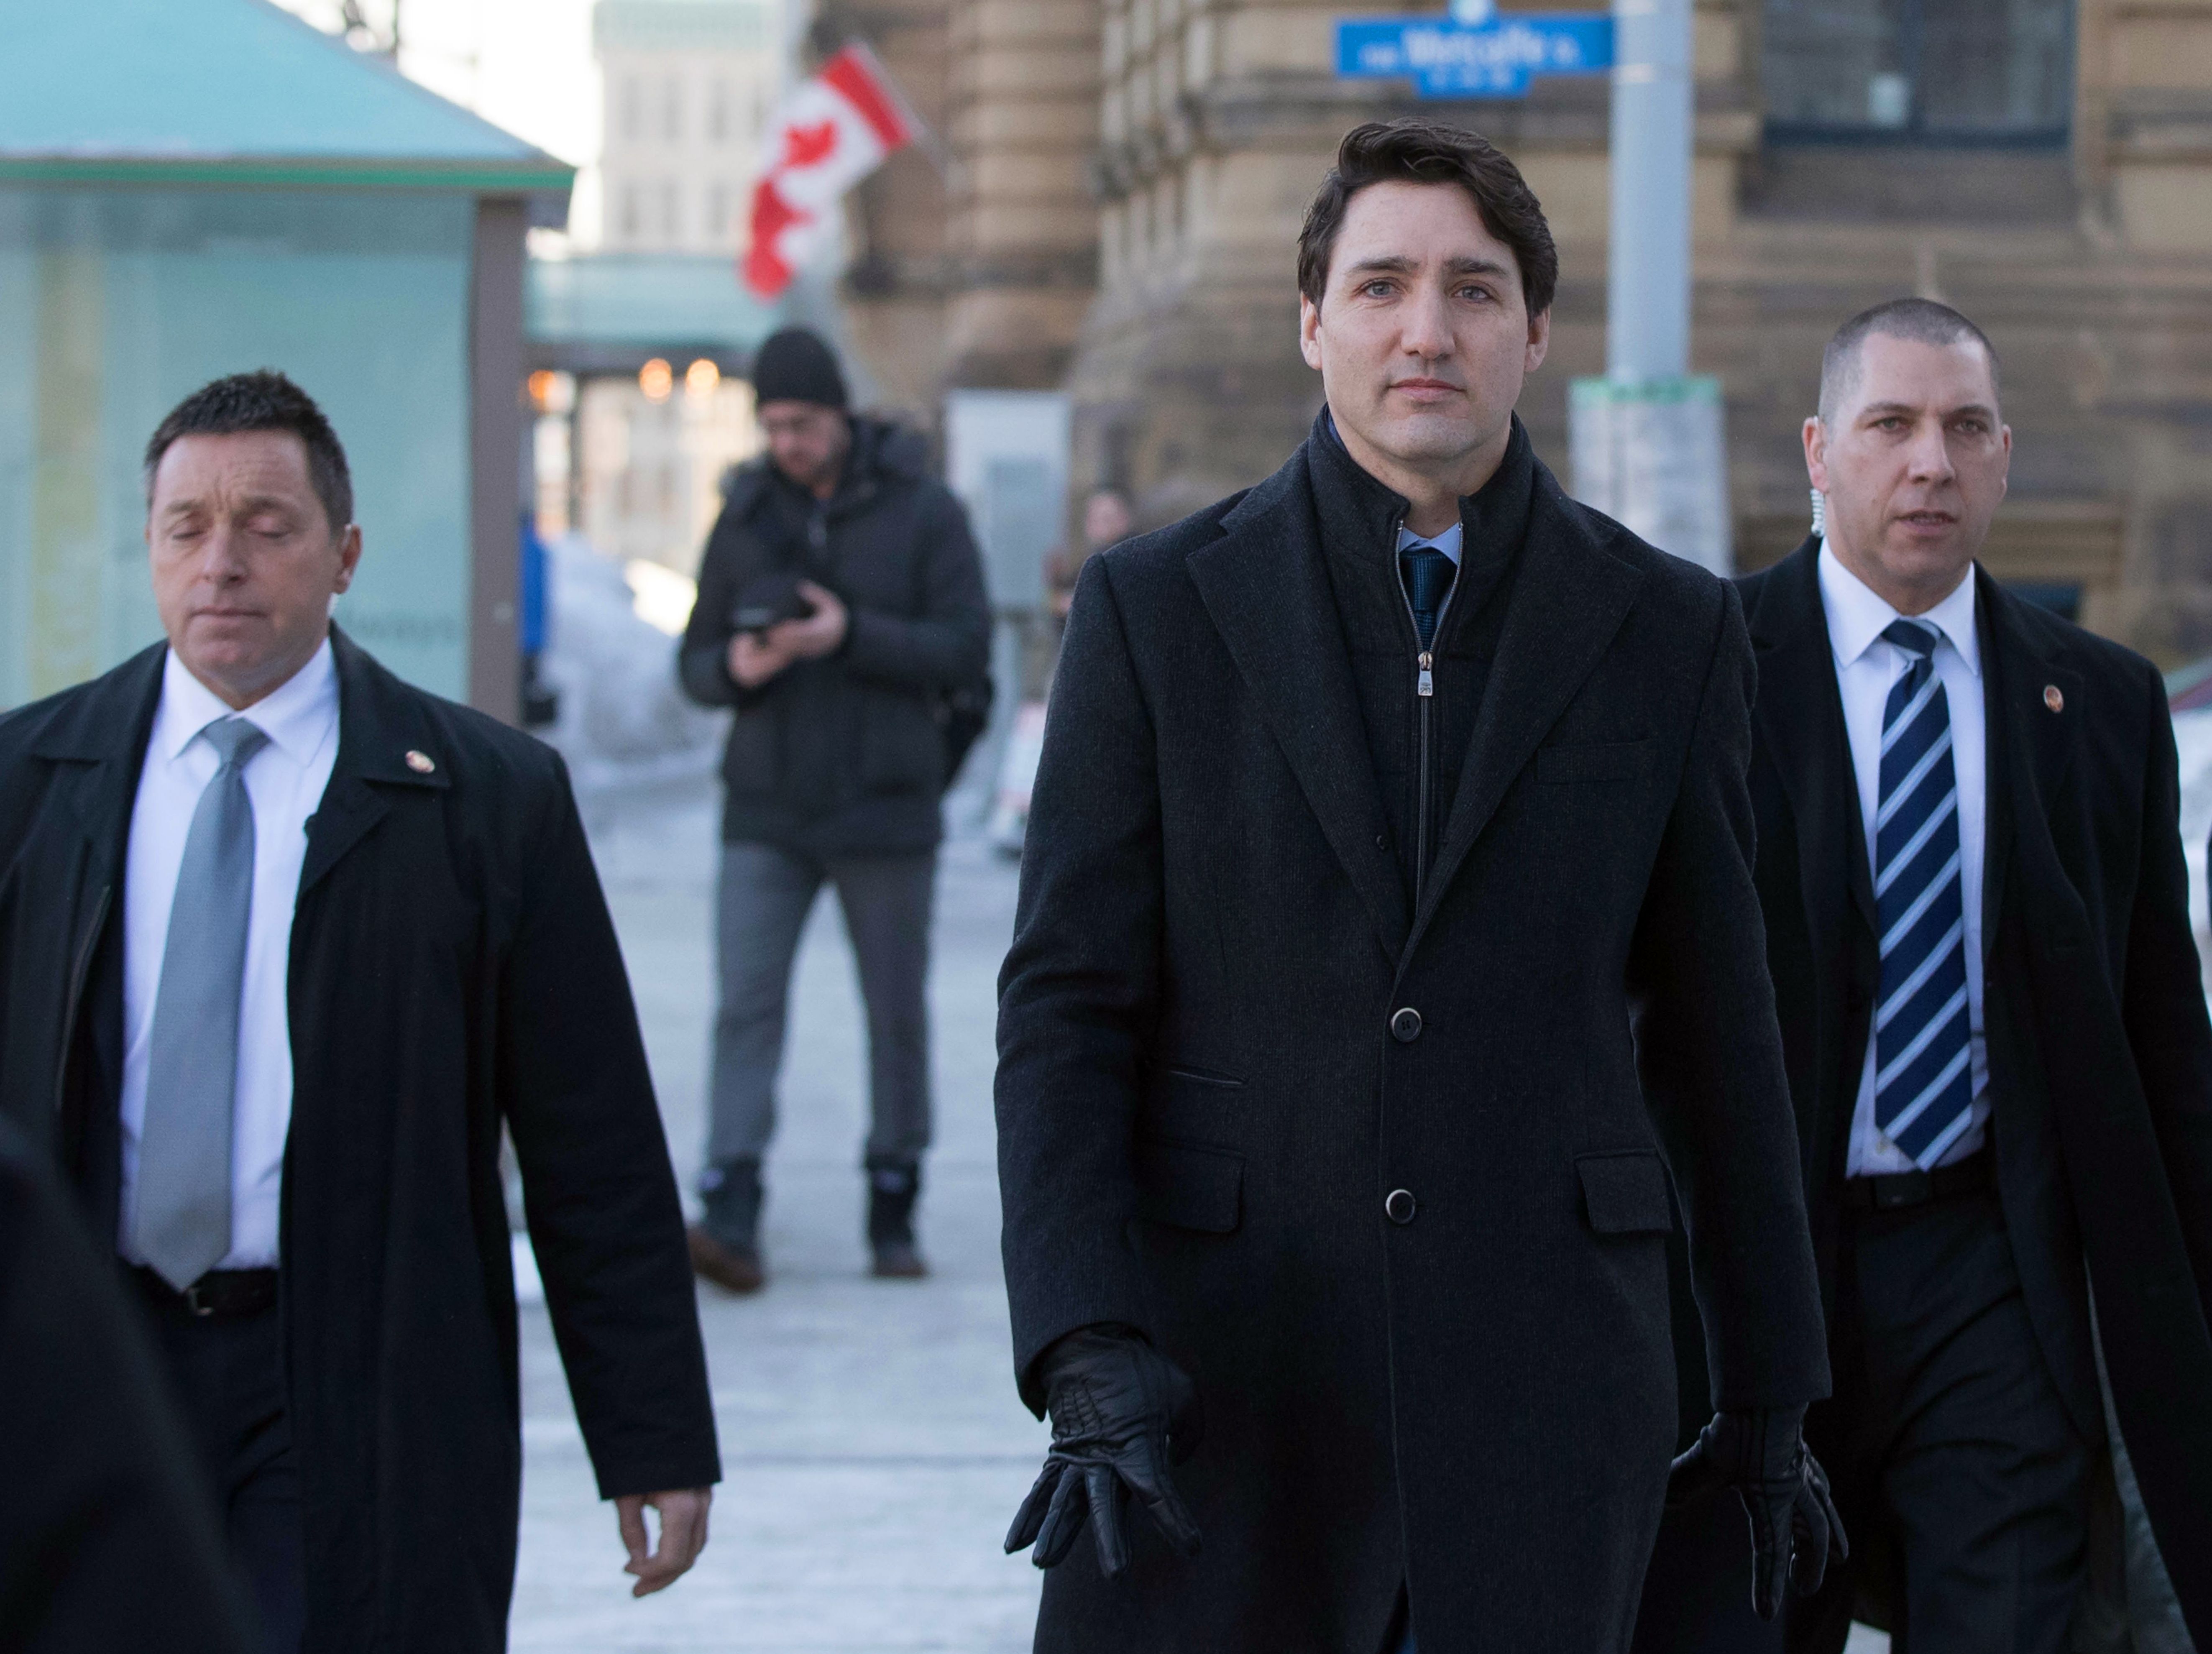 Canadian Prime Minister Justin Trudeau walks to a press conference addressing the SNC-Lavalin scandal from the Prime Minister's office in Ottawa, Ontario, on March 7, 2019. (Photo credit should read LARS HAGBERG/AFP/Getty Images)